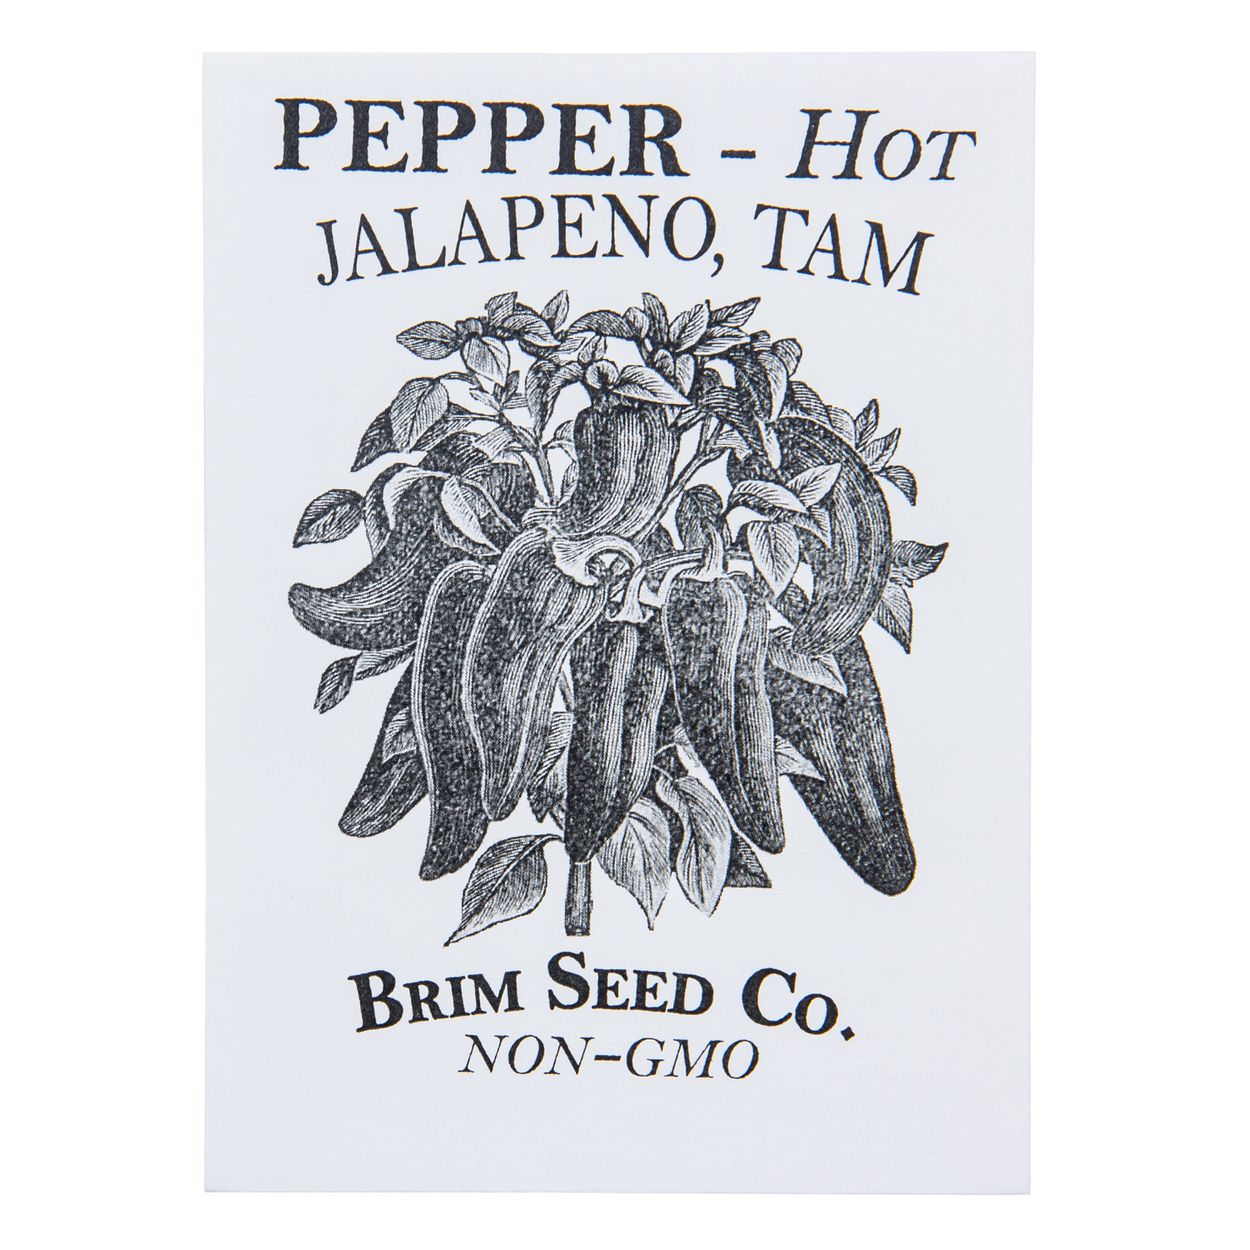 Brim Seed Co. - Hot Tam Jalapeno Pepper Seed